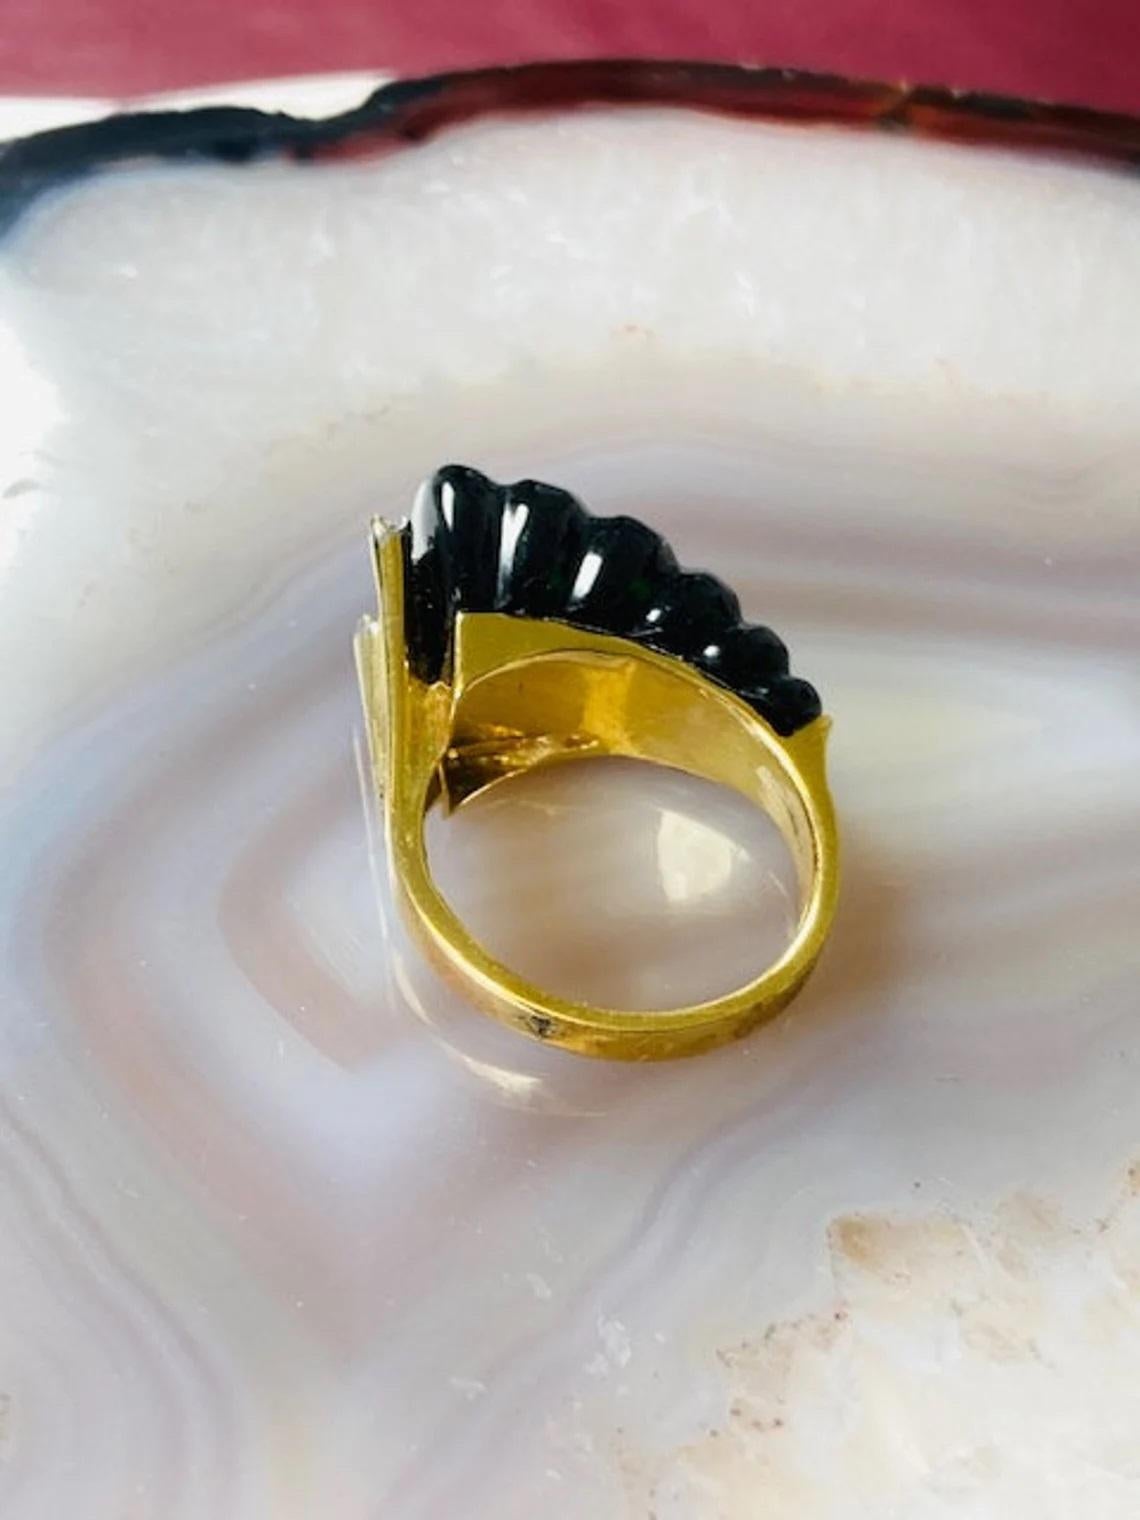 Vintage 14k Gold Black Onyx Half Scalloped Ring with Diamonds, One-of-a-kind For Sale 1